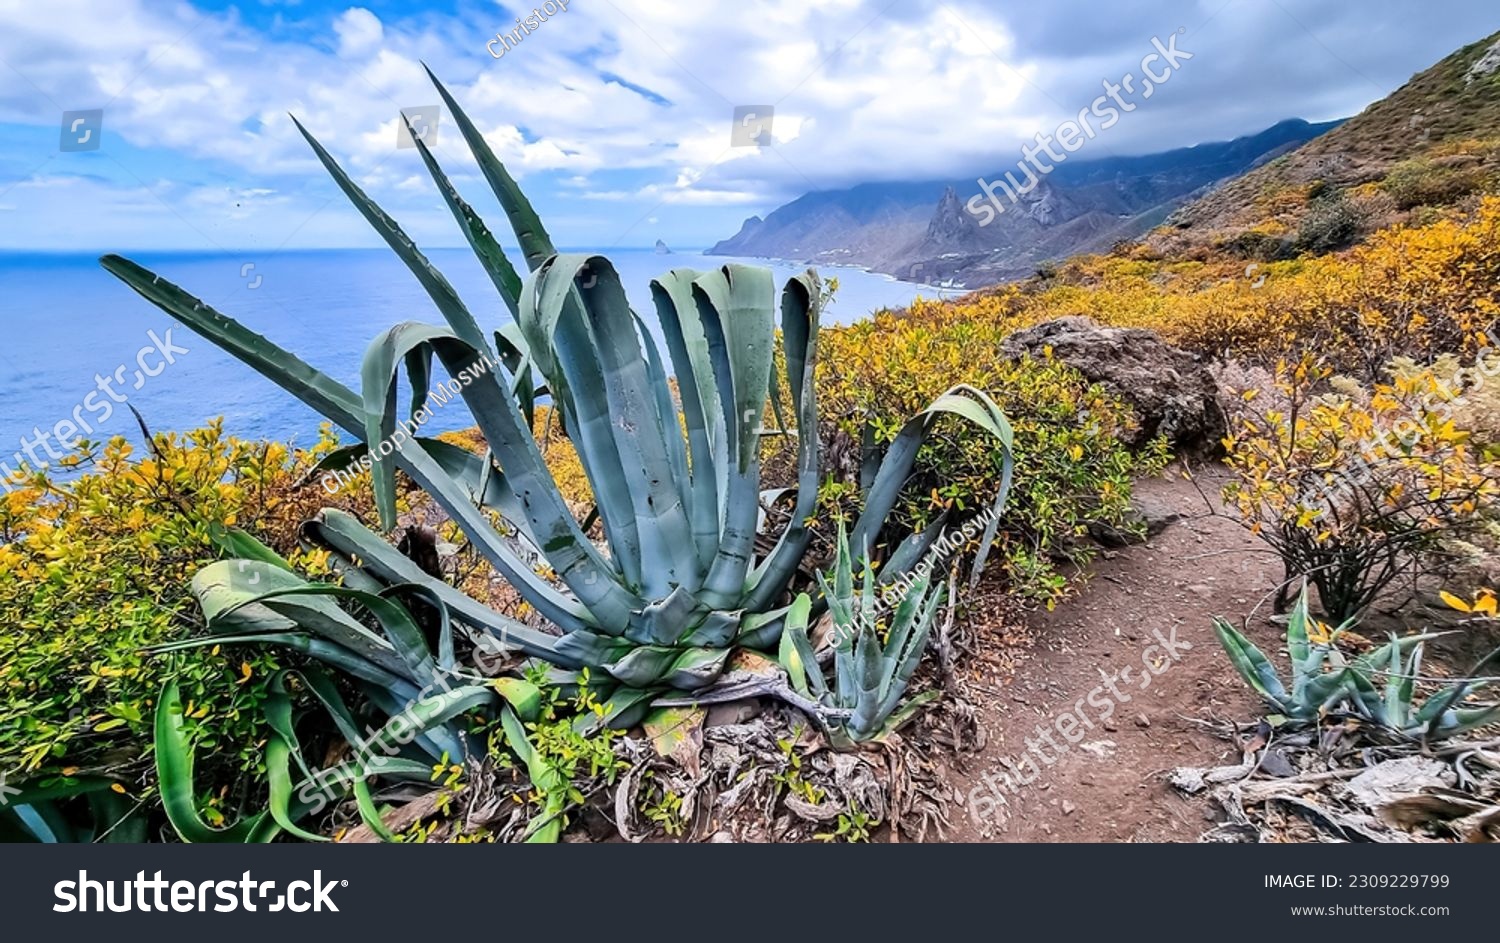 Agava cactus plant with scenic view of Atlantic Ocean coastline and Anaga mountain range. Tenerife, Canary Islands, Spain, Europe. Looking at Roque de las Animas. Hiking trail from Afur to Taganana #2309229799